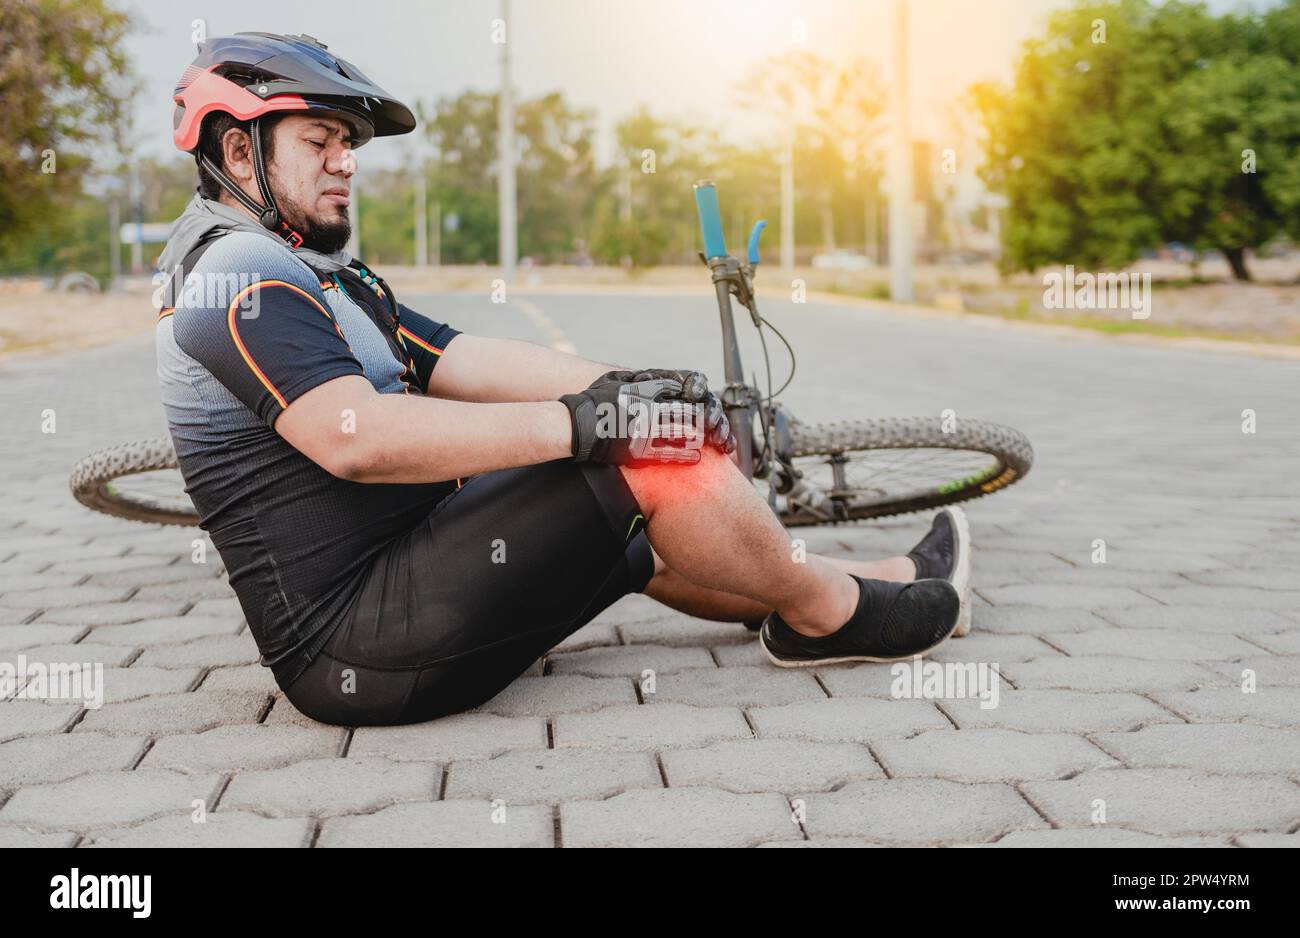 Cyclist with knee pain outdoors. Male cyclist sitting on the pavement with knee pain. Concept of a cyclist with knee injury outdoors Stock Photo